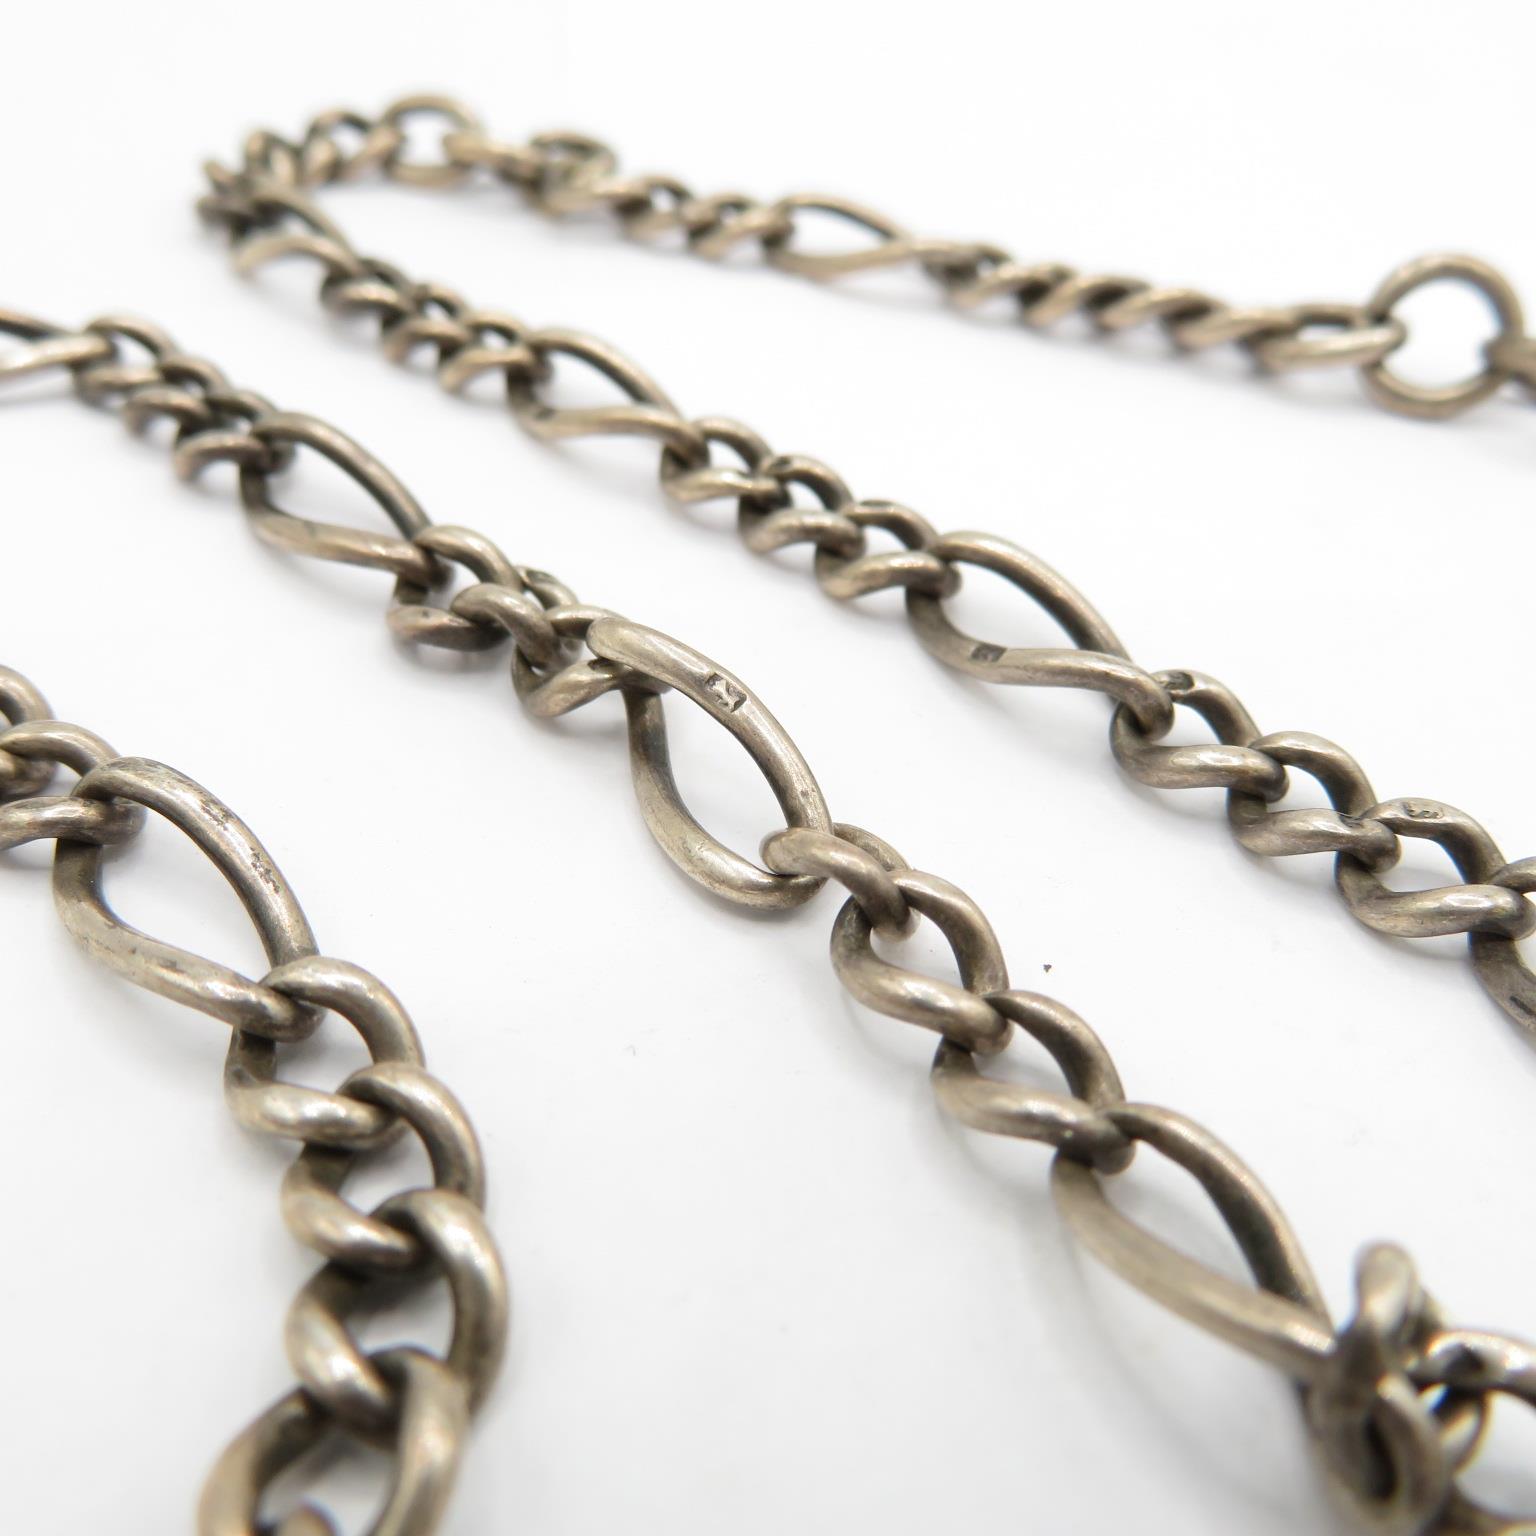 Vintage silver watch chain with fob chain measures 42cm total weight 45g - Image 4 of 4